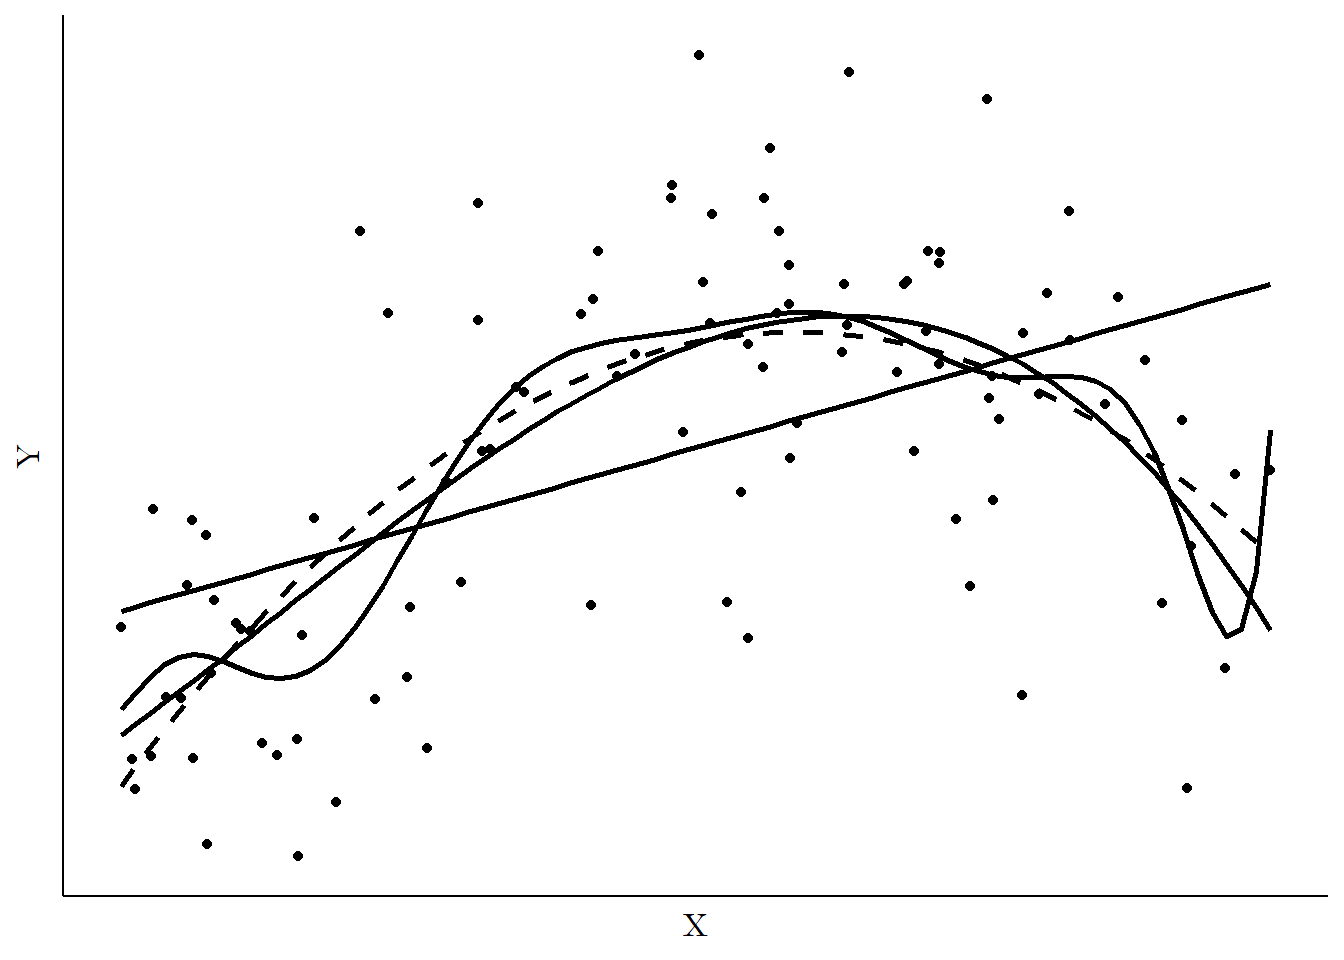 Scatterplot of data with overlaid regression fits: linear, and second, third, and tenth-degree polynomials